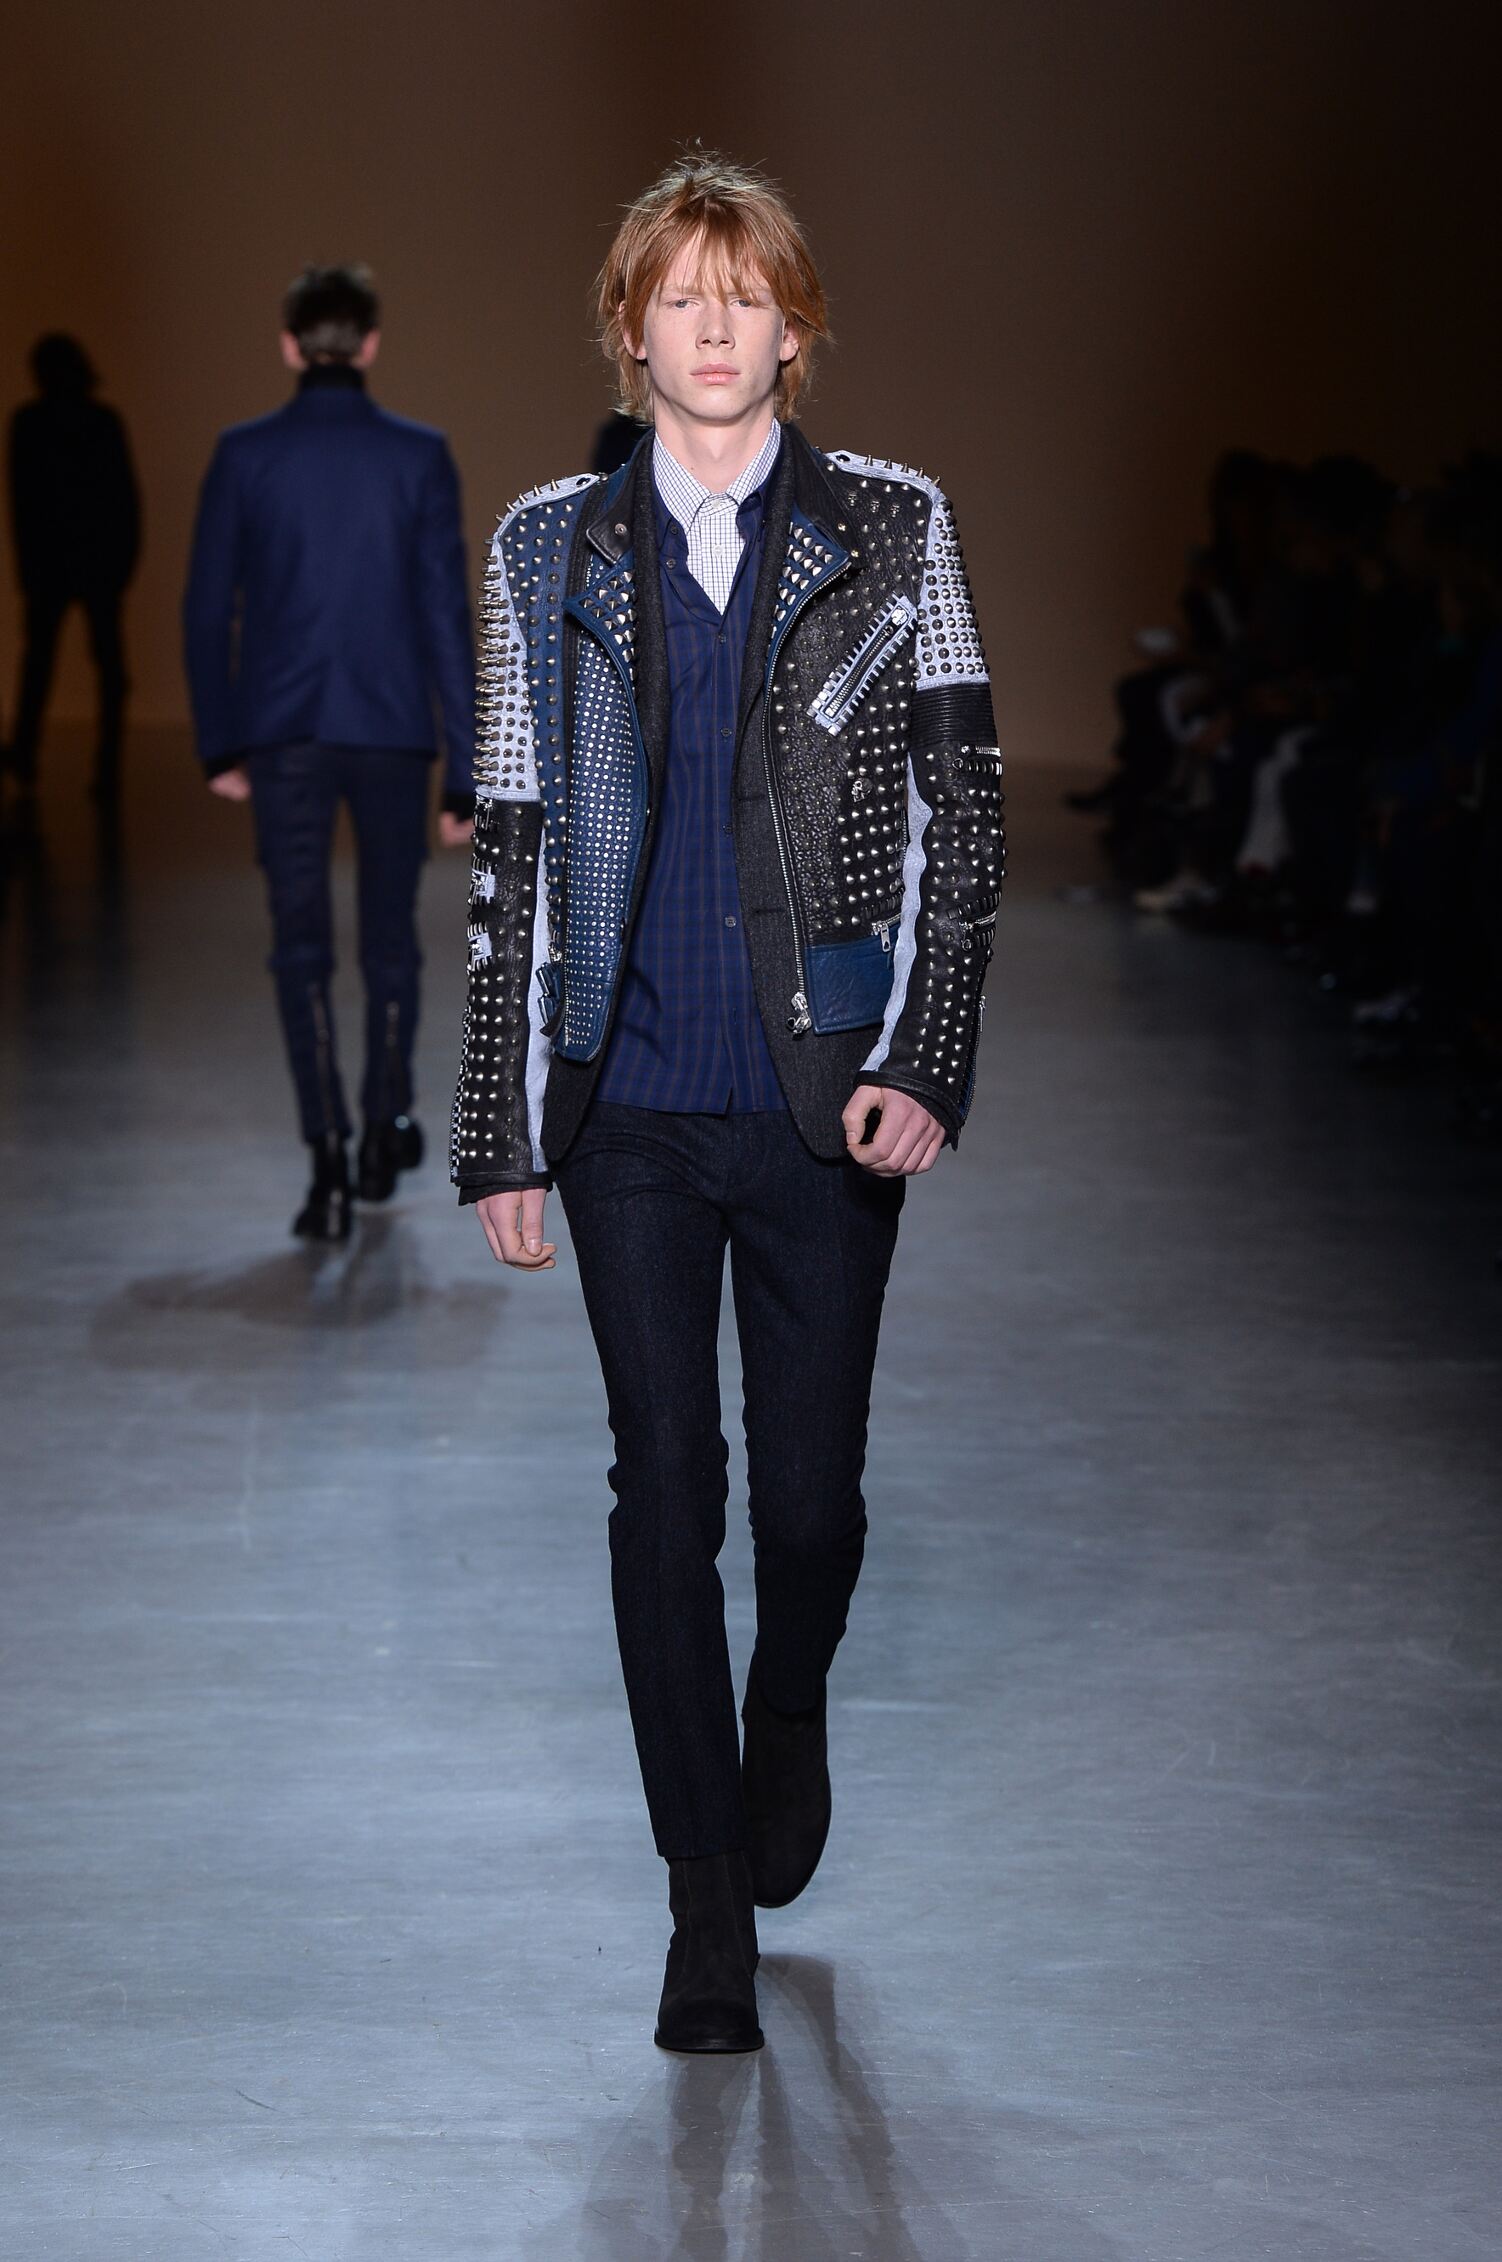 DIESEL BLACK GOLD FALL WINTER 2015-16 MEN’S COLLECTION | The Skinny Beep